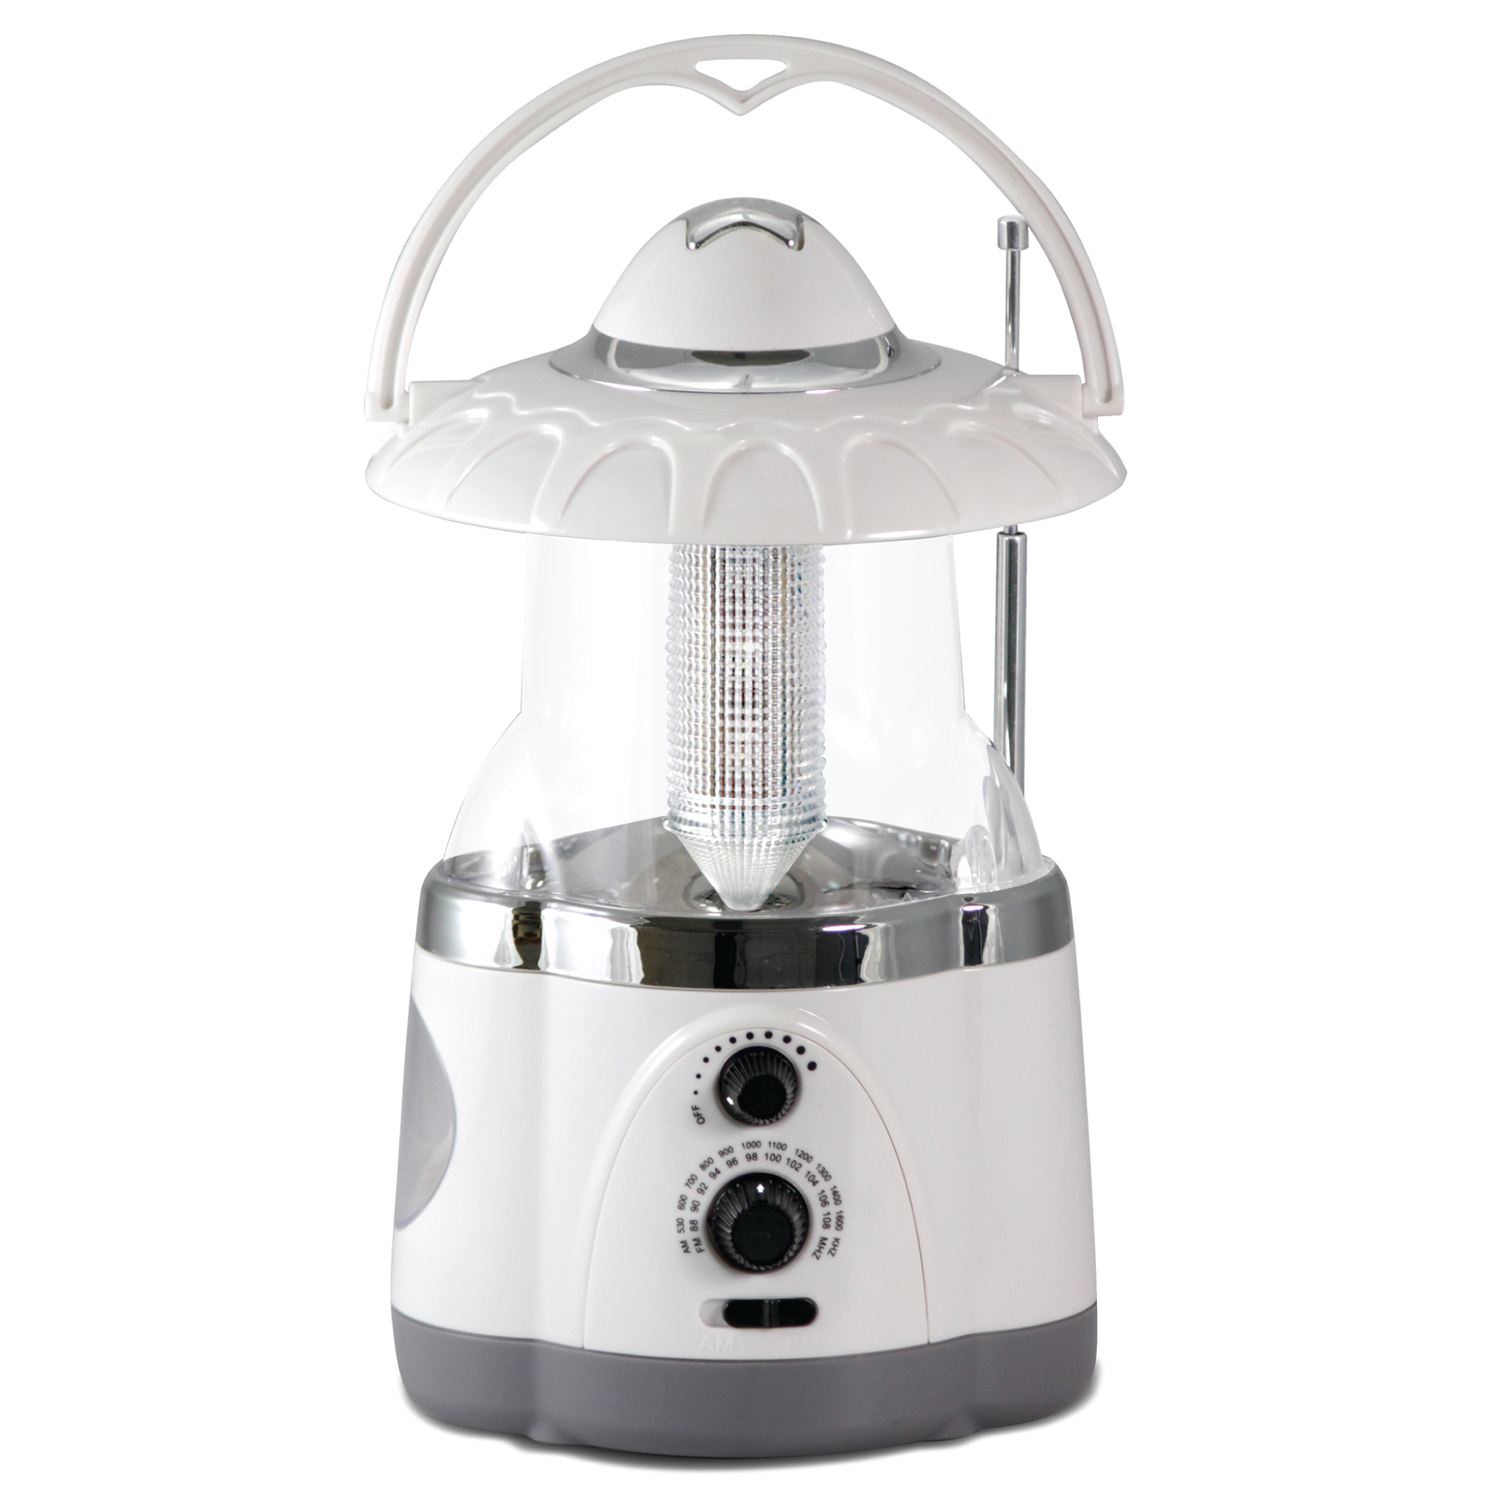 North Point® AM/FM radio lantern in white, featuring 12 bright LED bulbs, central reflector, 4 ultra-bright LED flashlight, and fold away carry handle.